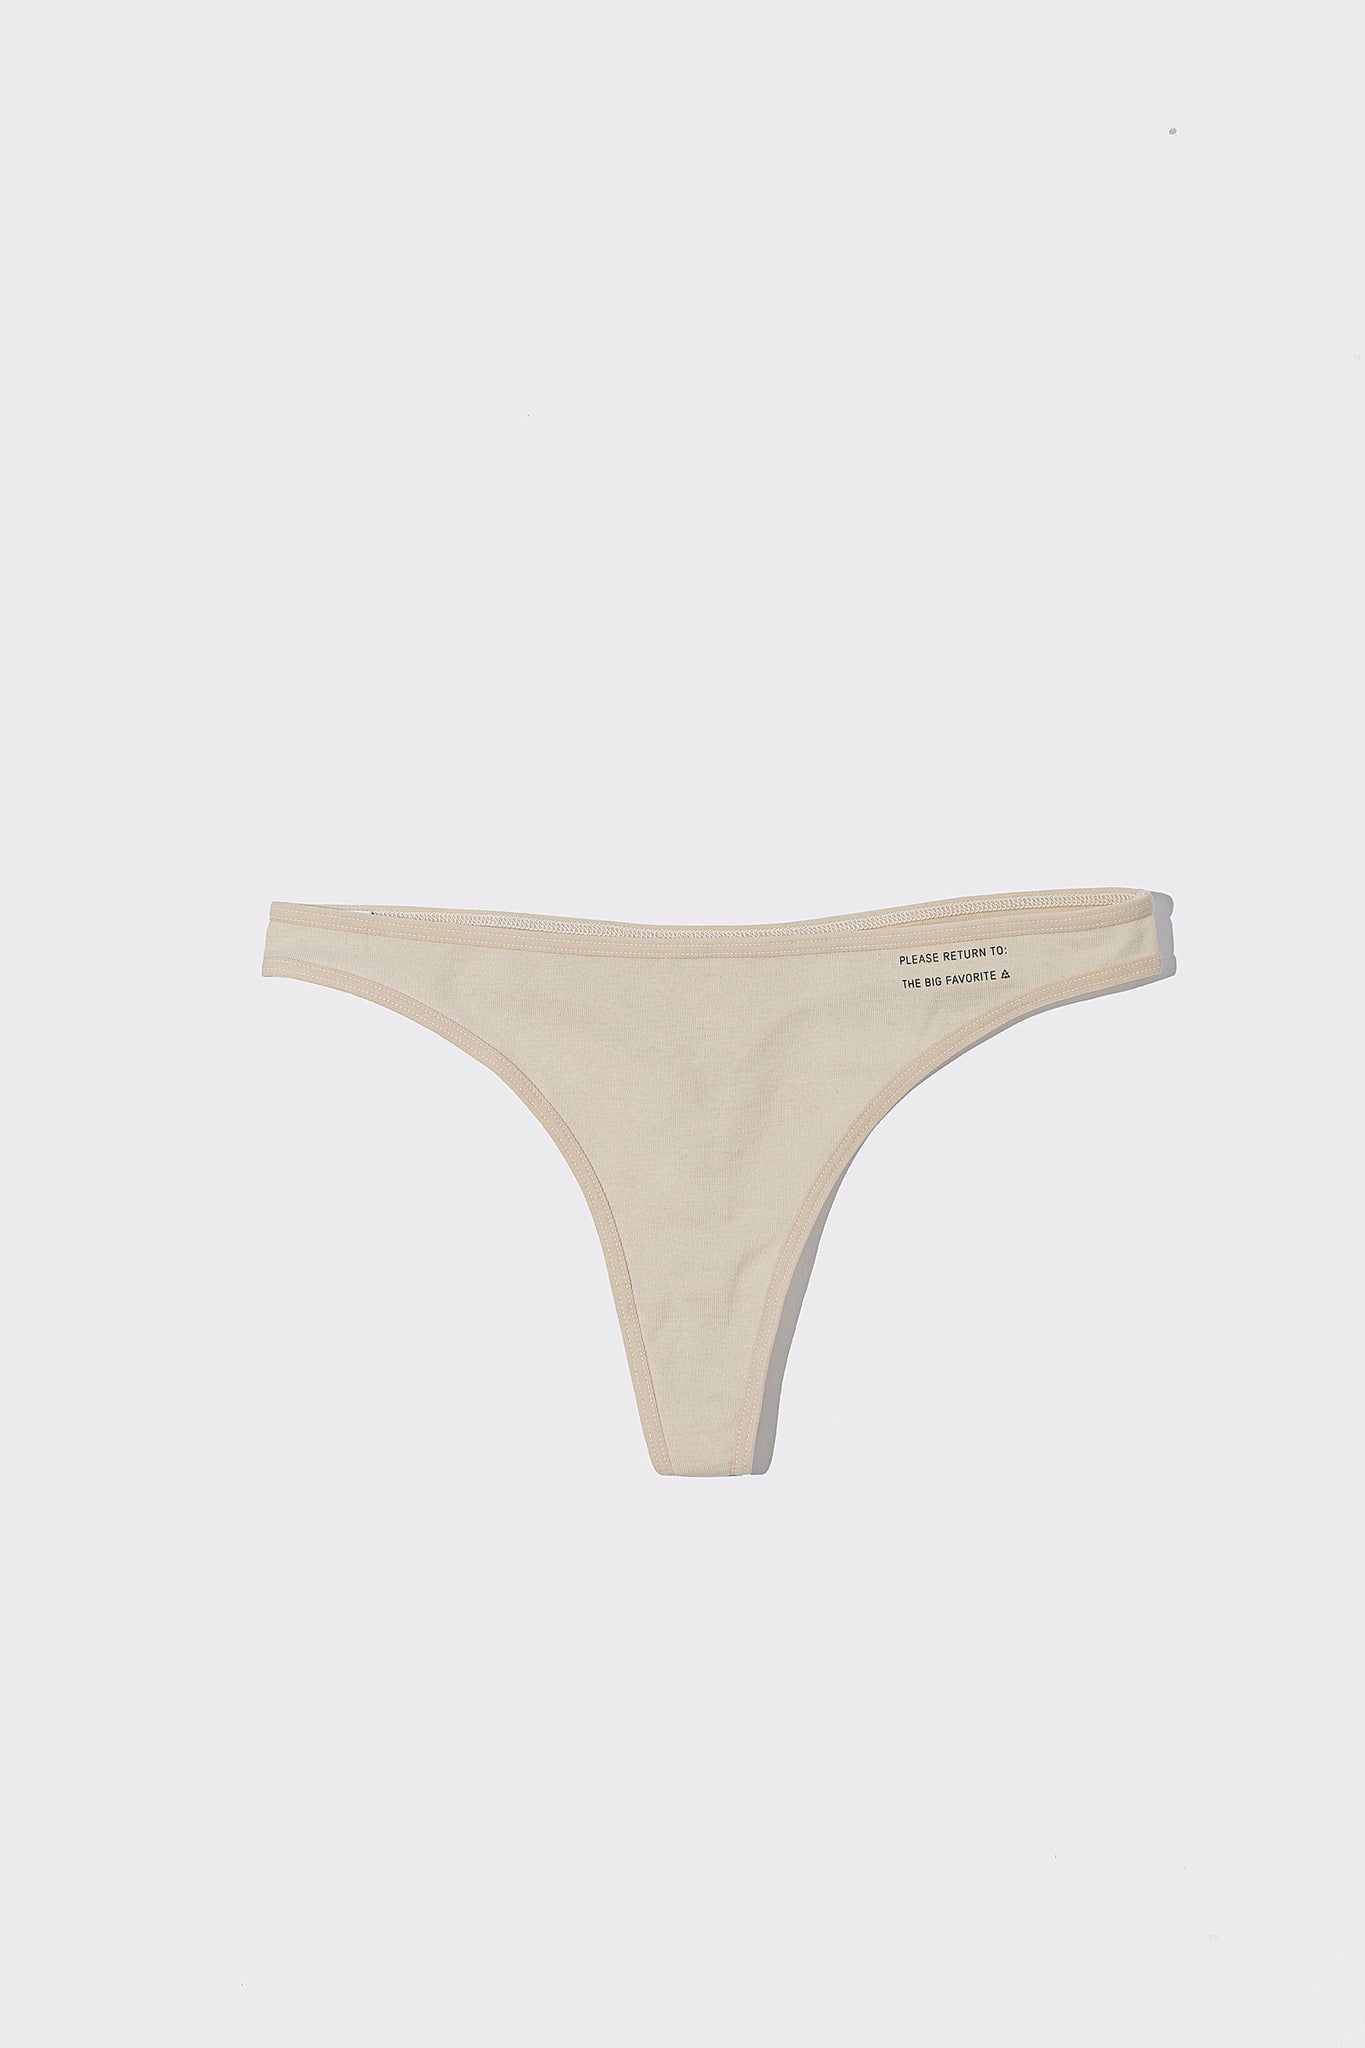 The Undyed Thong